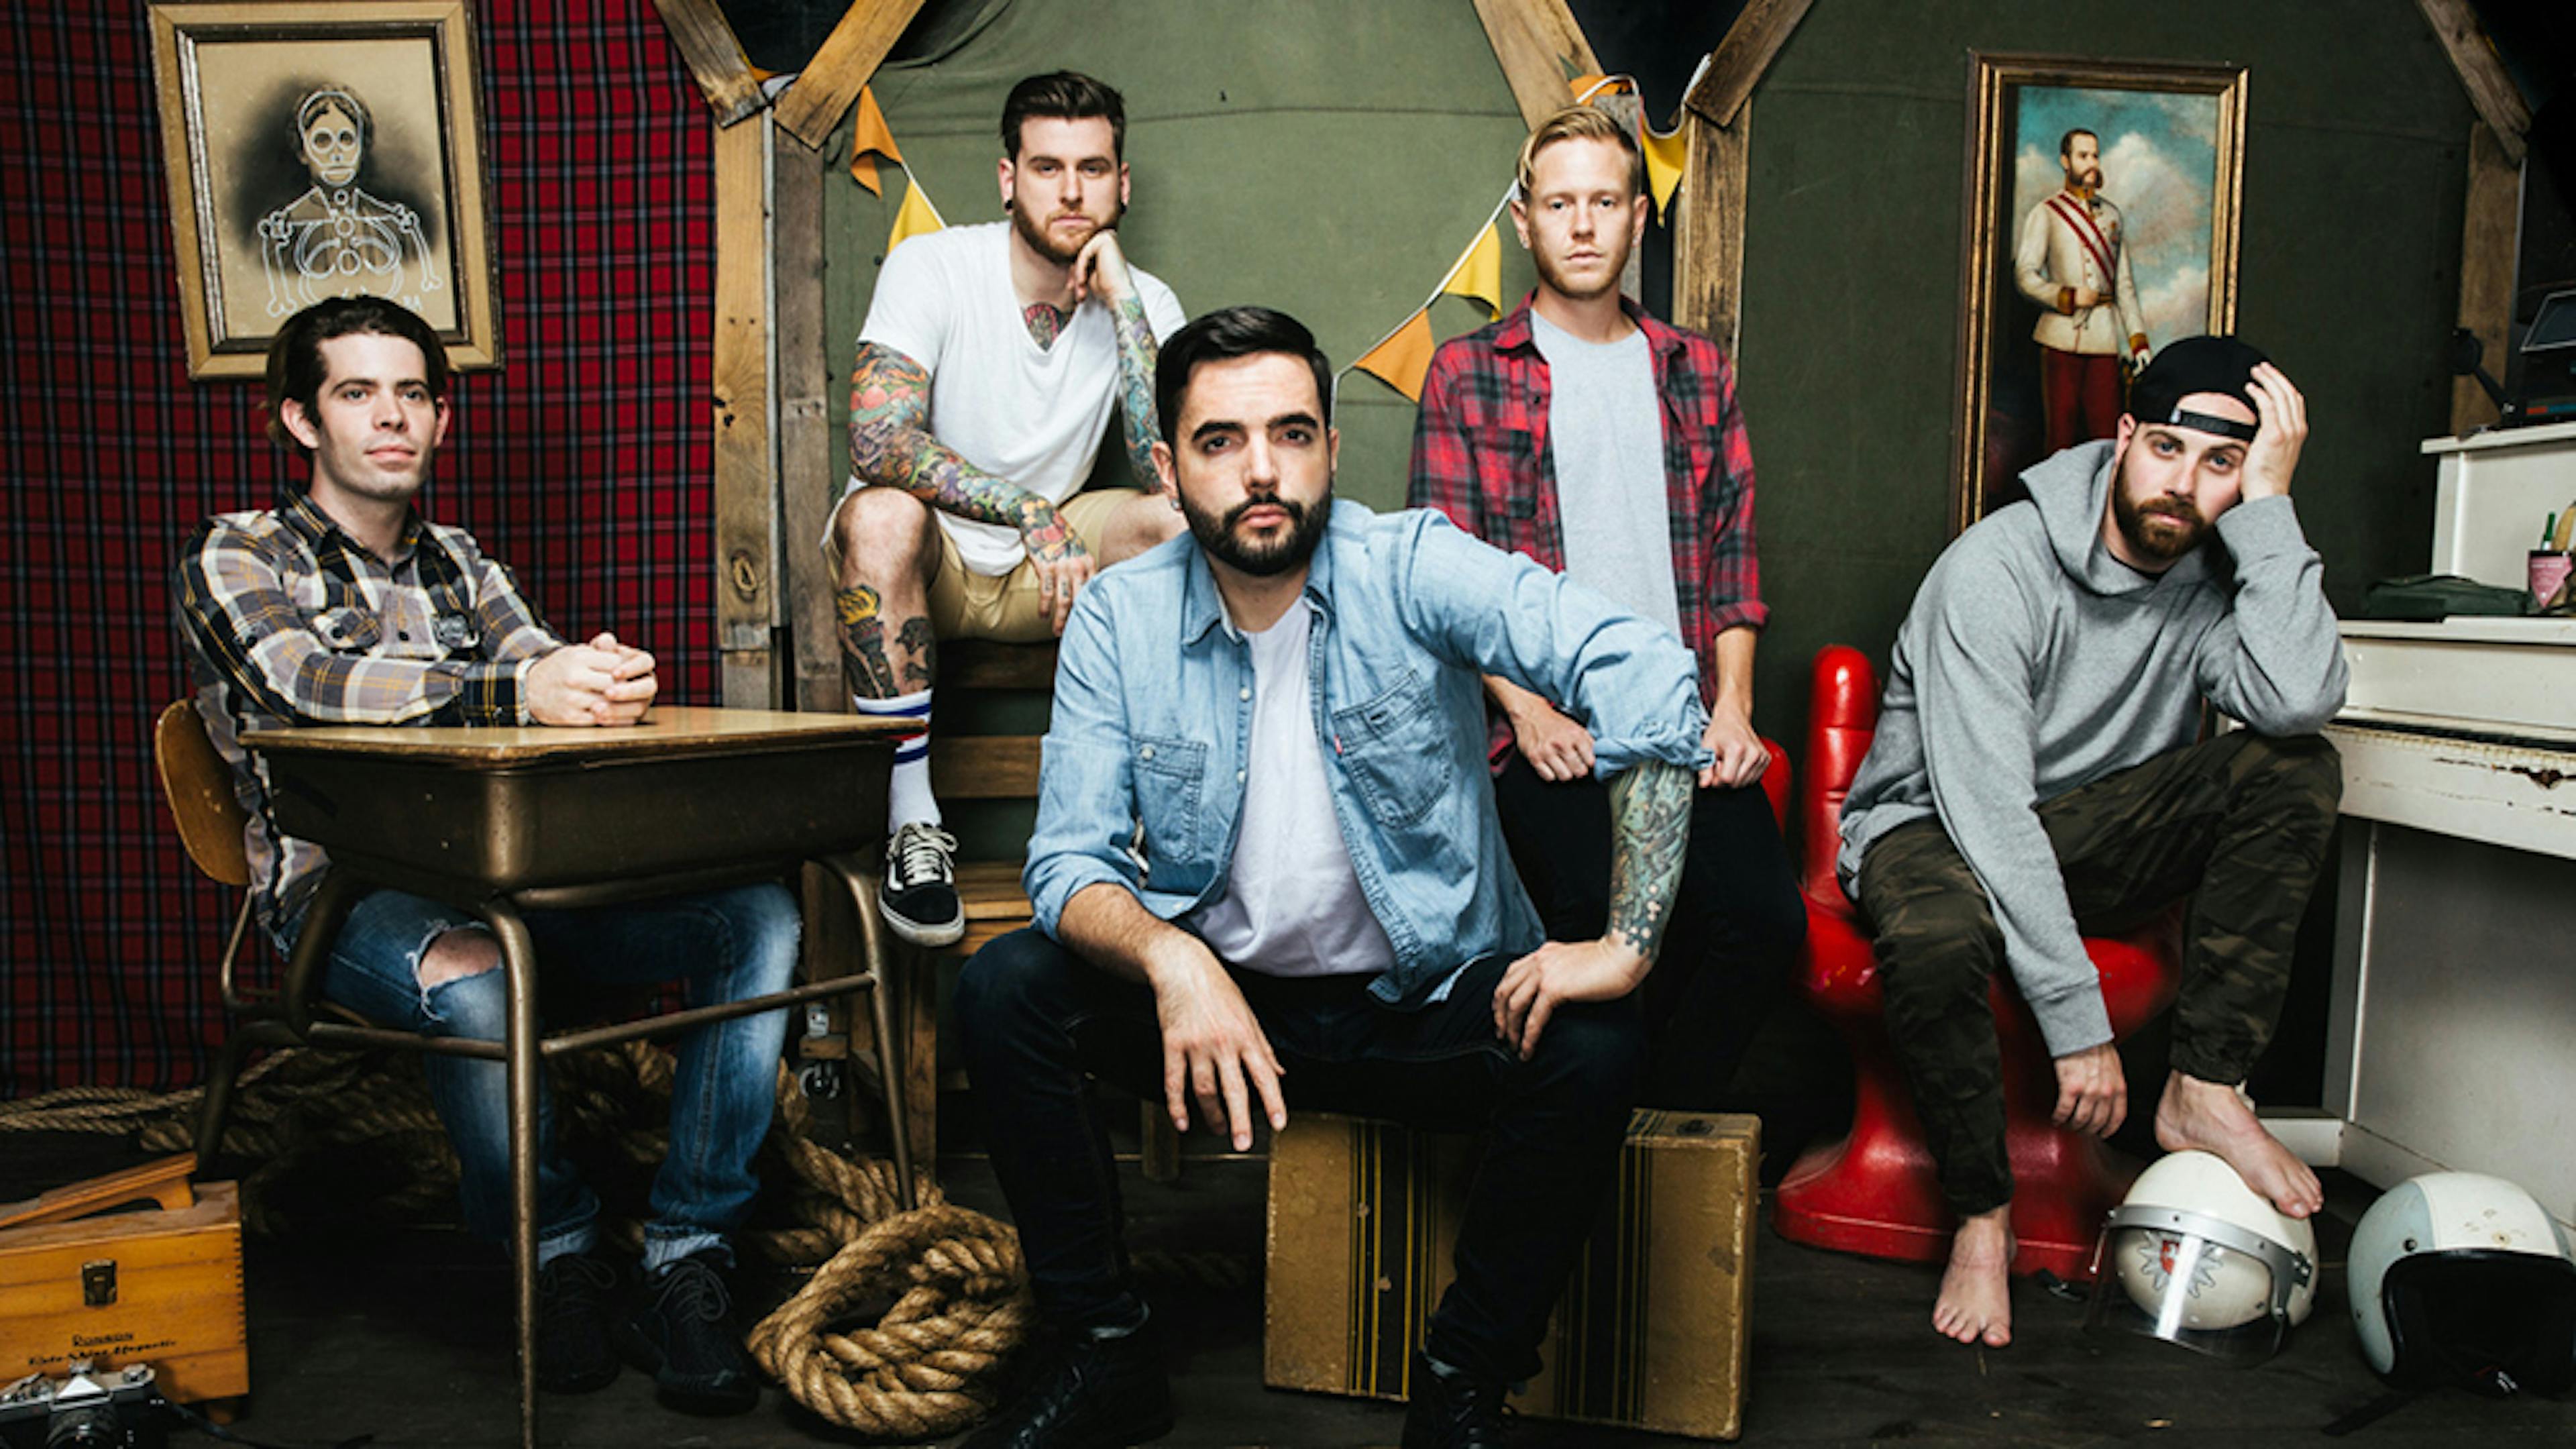 This Is What A Day To Remember Played On The First Night Of Their Headline Tour